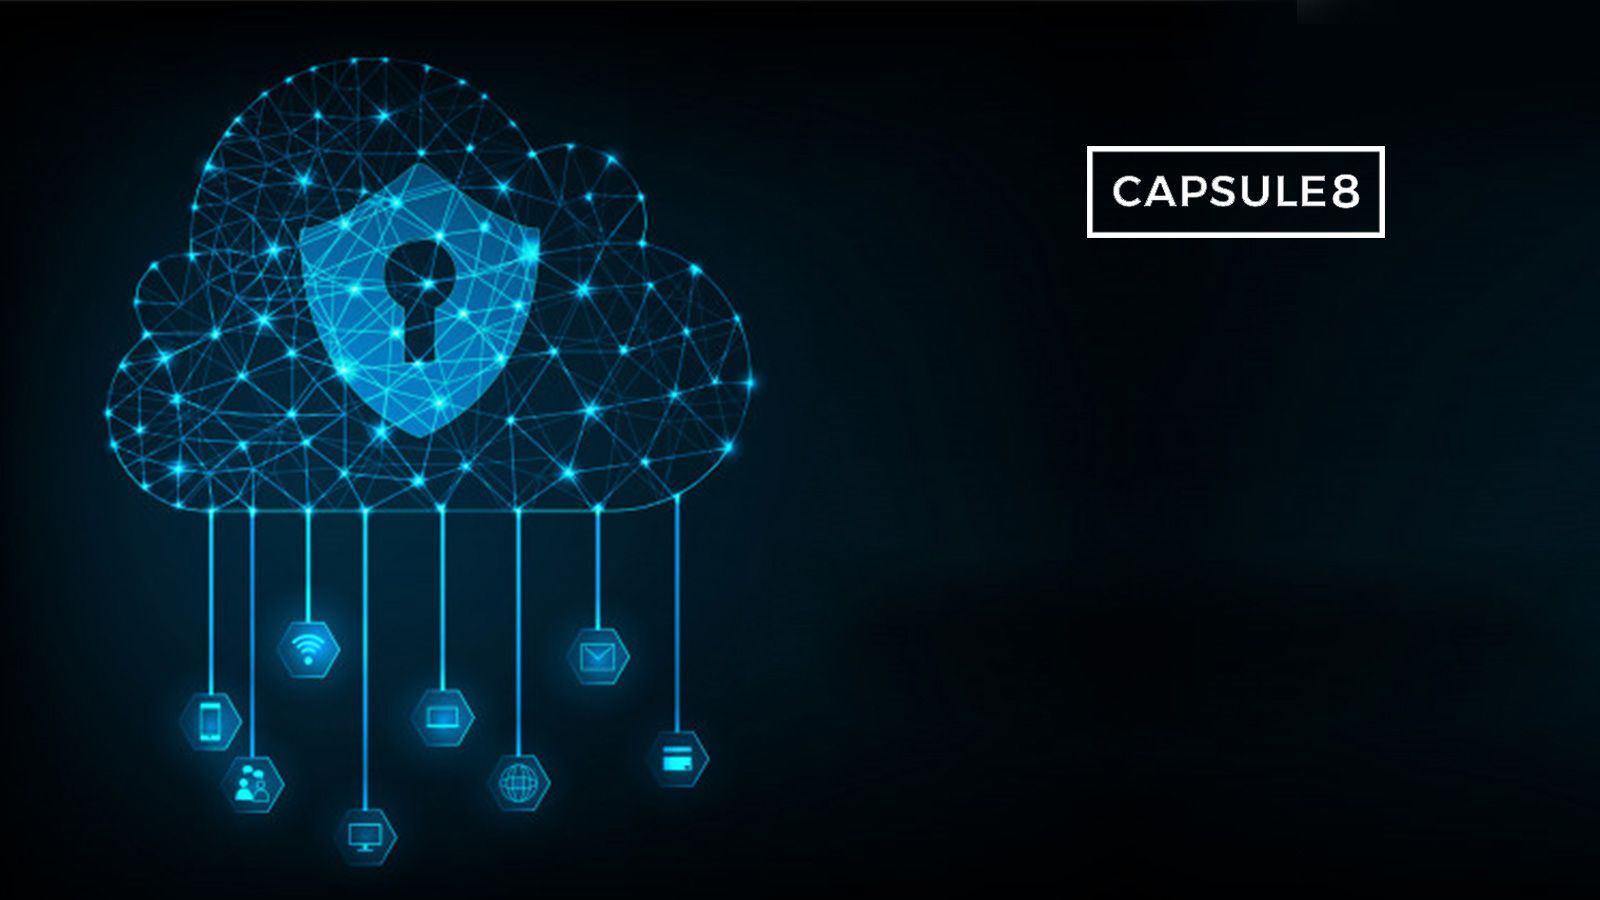 capsule8 Supports Google Cloud SCC with Security Partner Integration